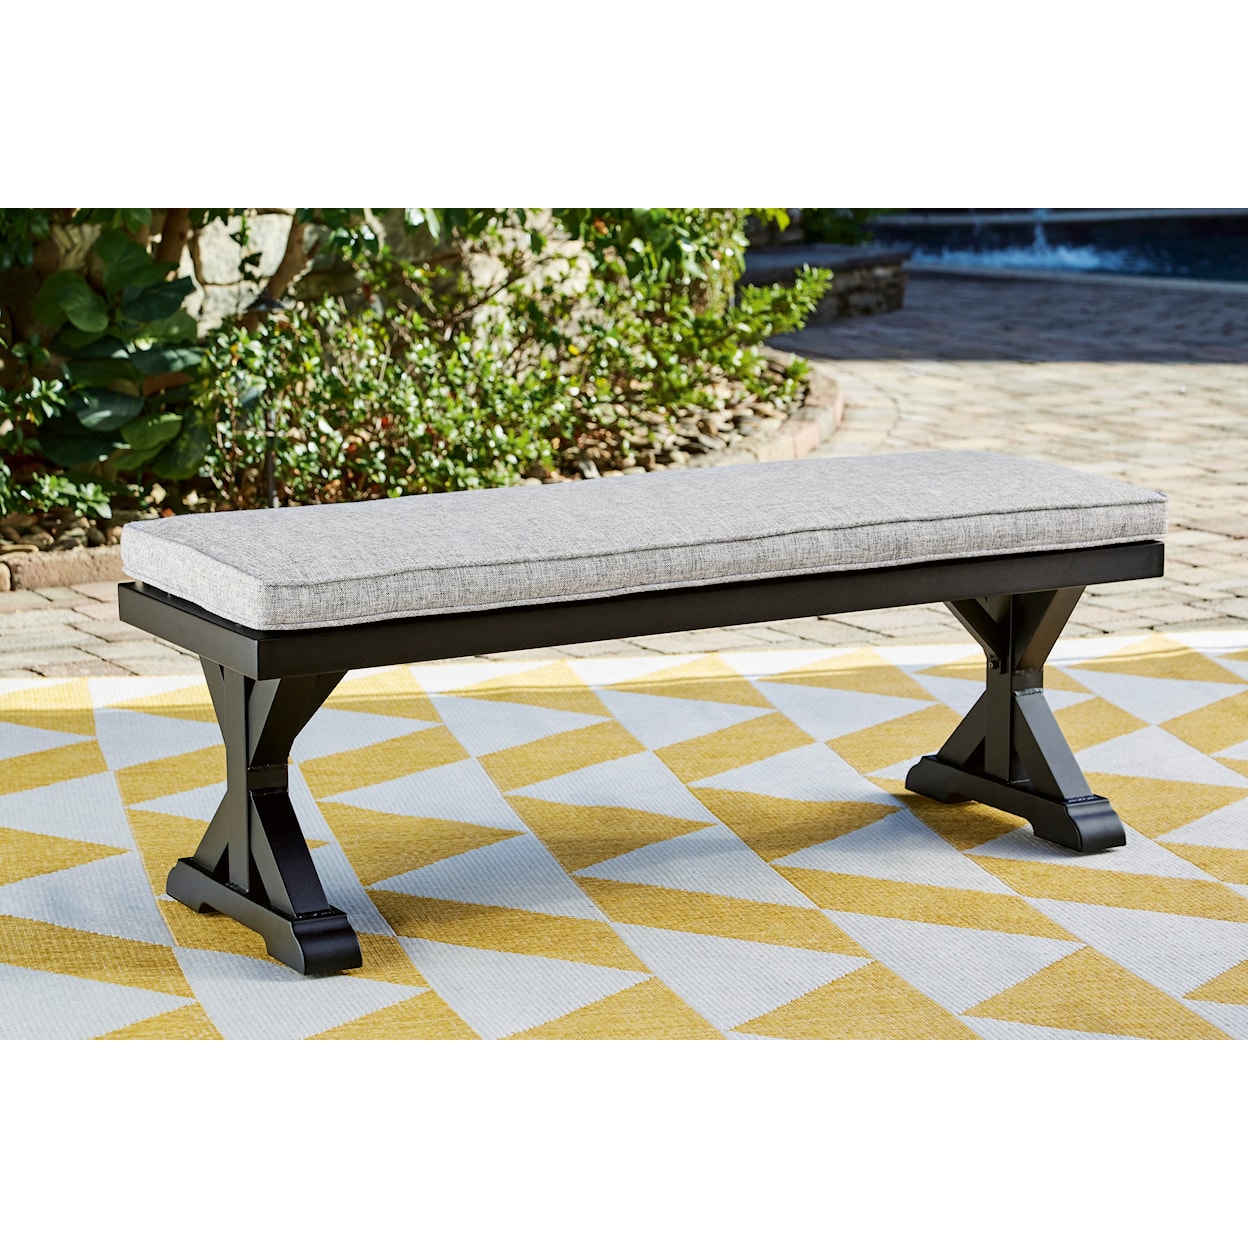 Michael Alan Select Beachcroft Outdoor Bench with Cushion